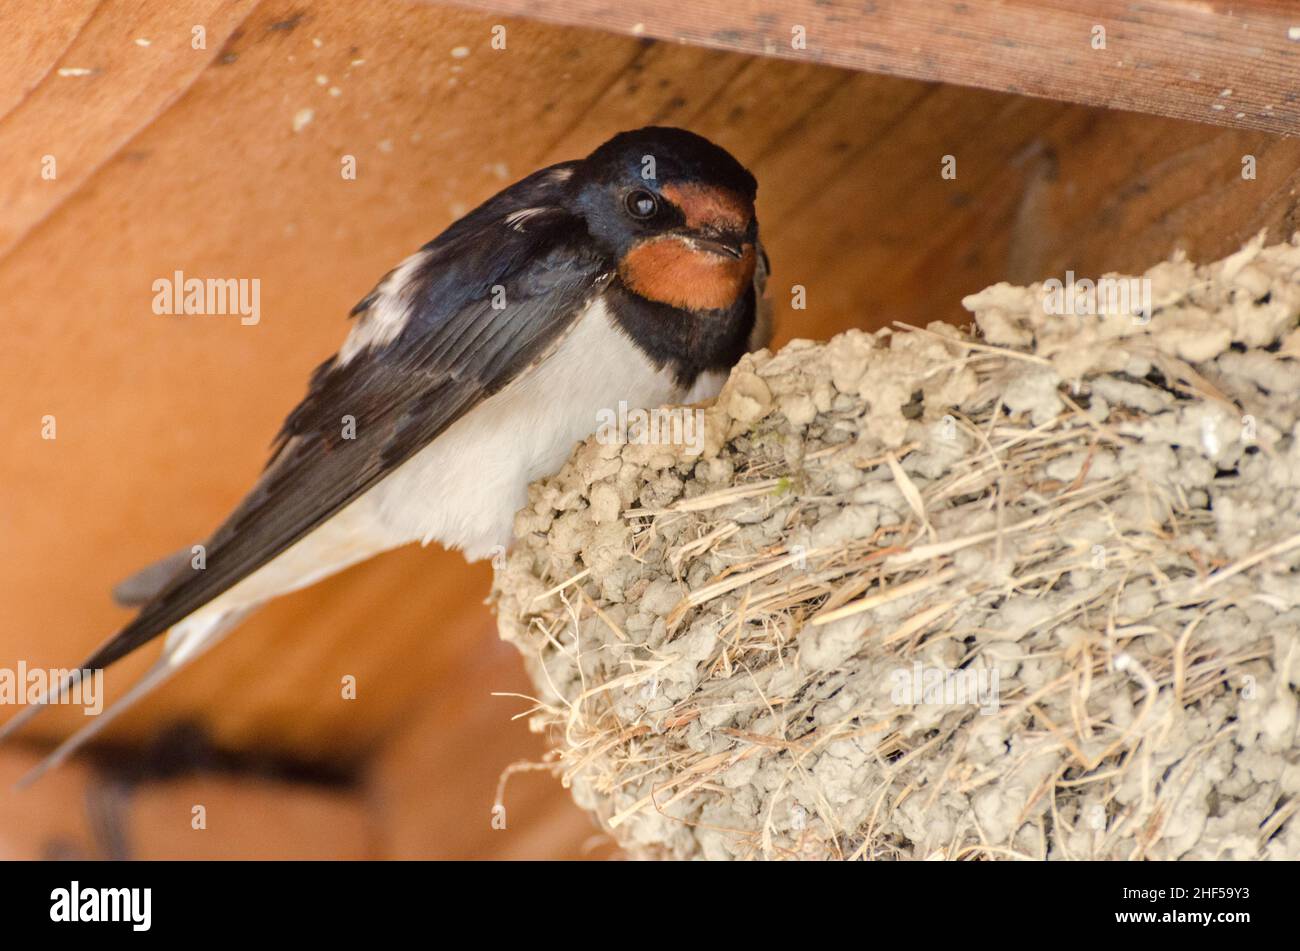 Small swallow perched on its nest under a house roof in Okage Yokocho, Ise, Japan. Stock Photo